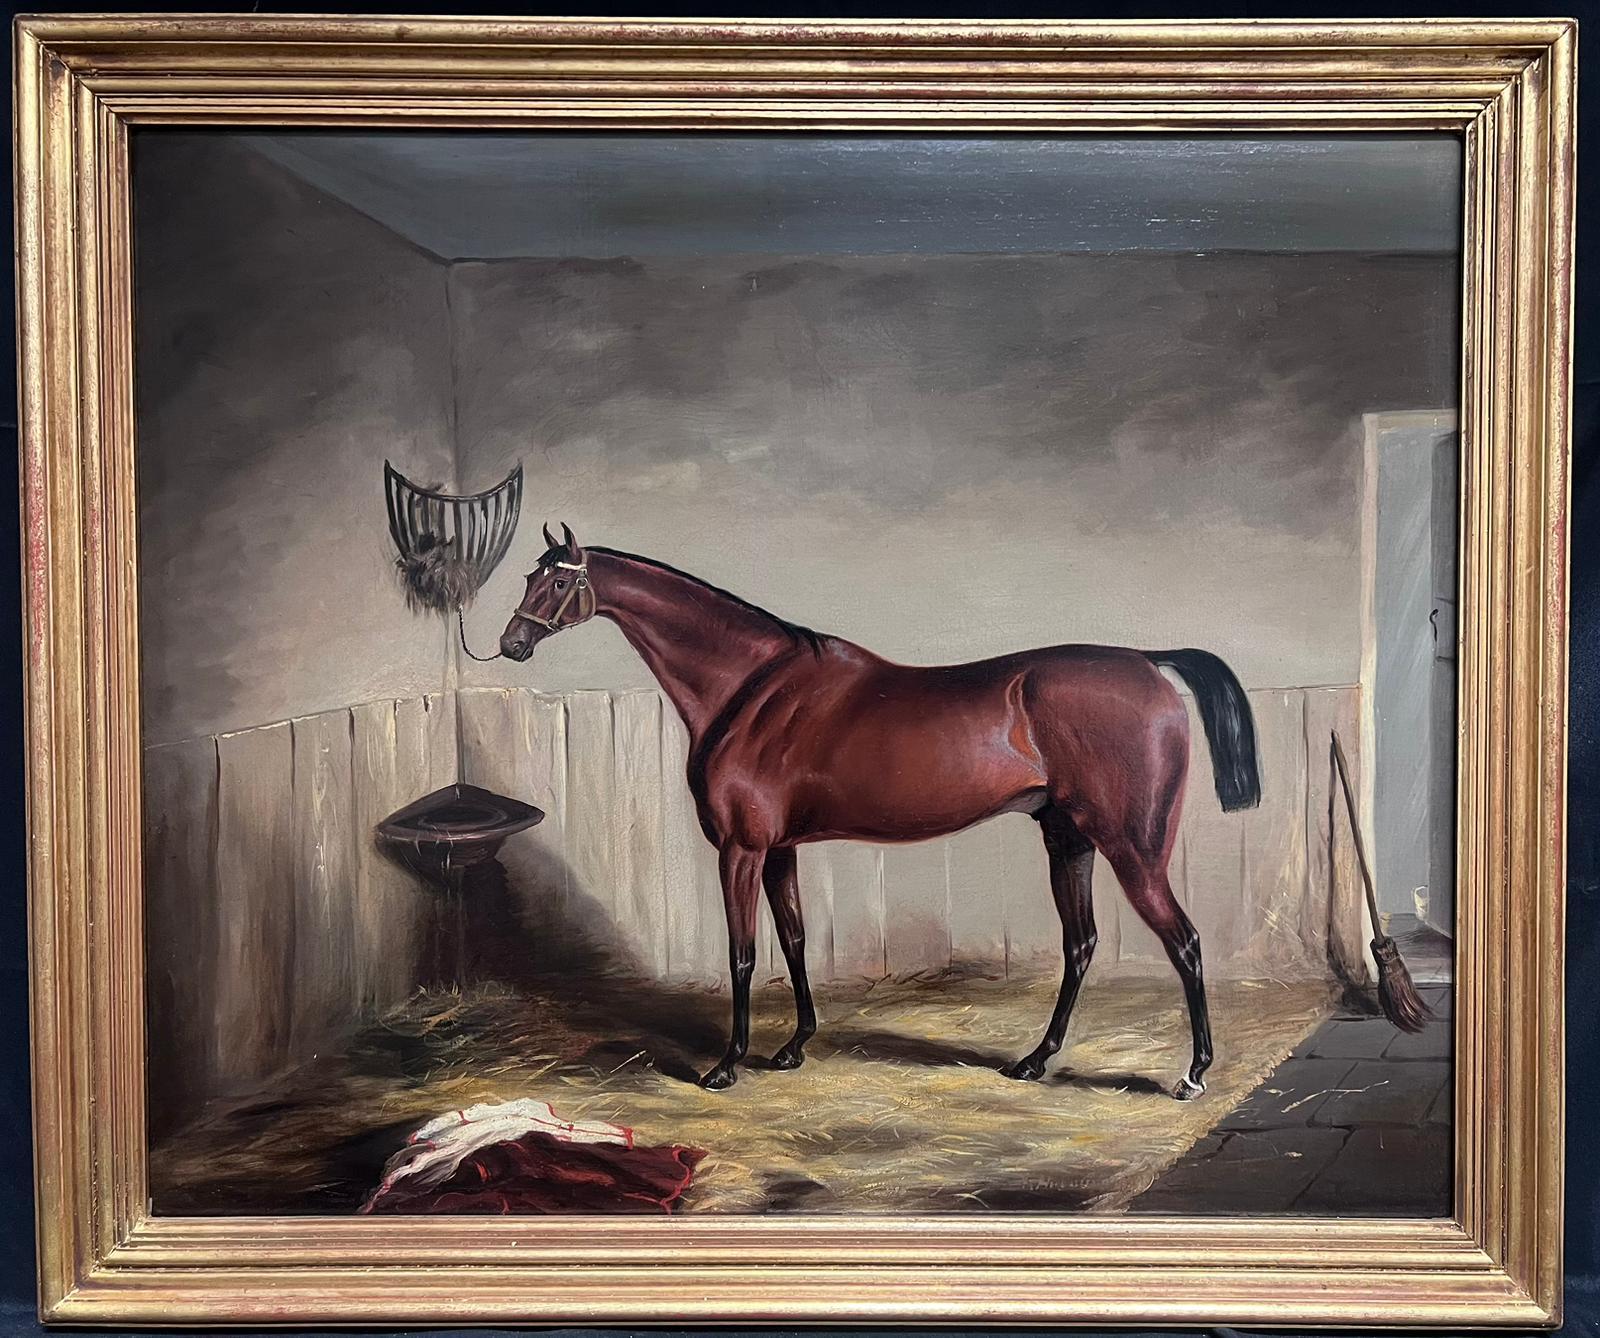 The Chestnut Hunter
British School, circa 1870's period
indistinctly signed 
oil on canvas, framed
framed: 28 x 34 inches
canvas: 25 x 30 inches
provenance: private collection, south west of England
condition: very good and sound condition 